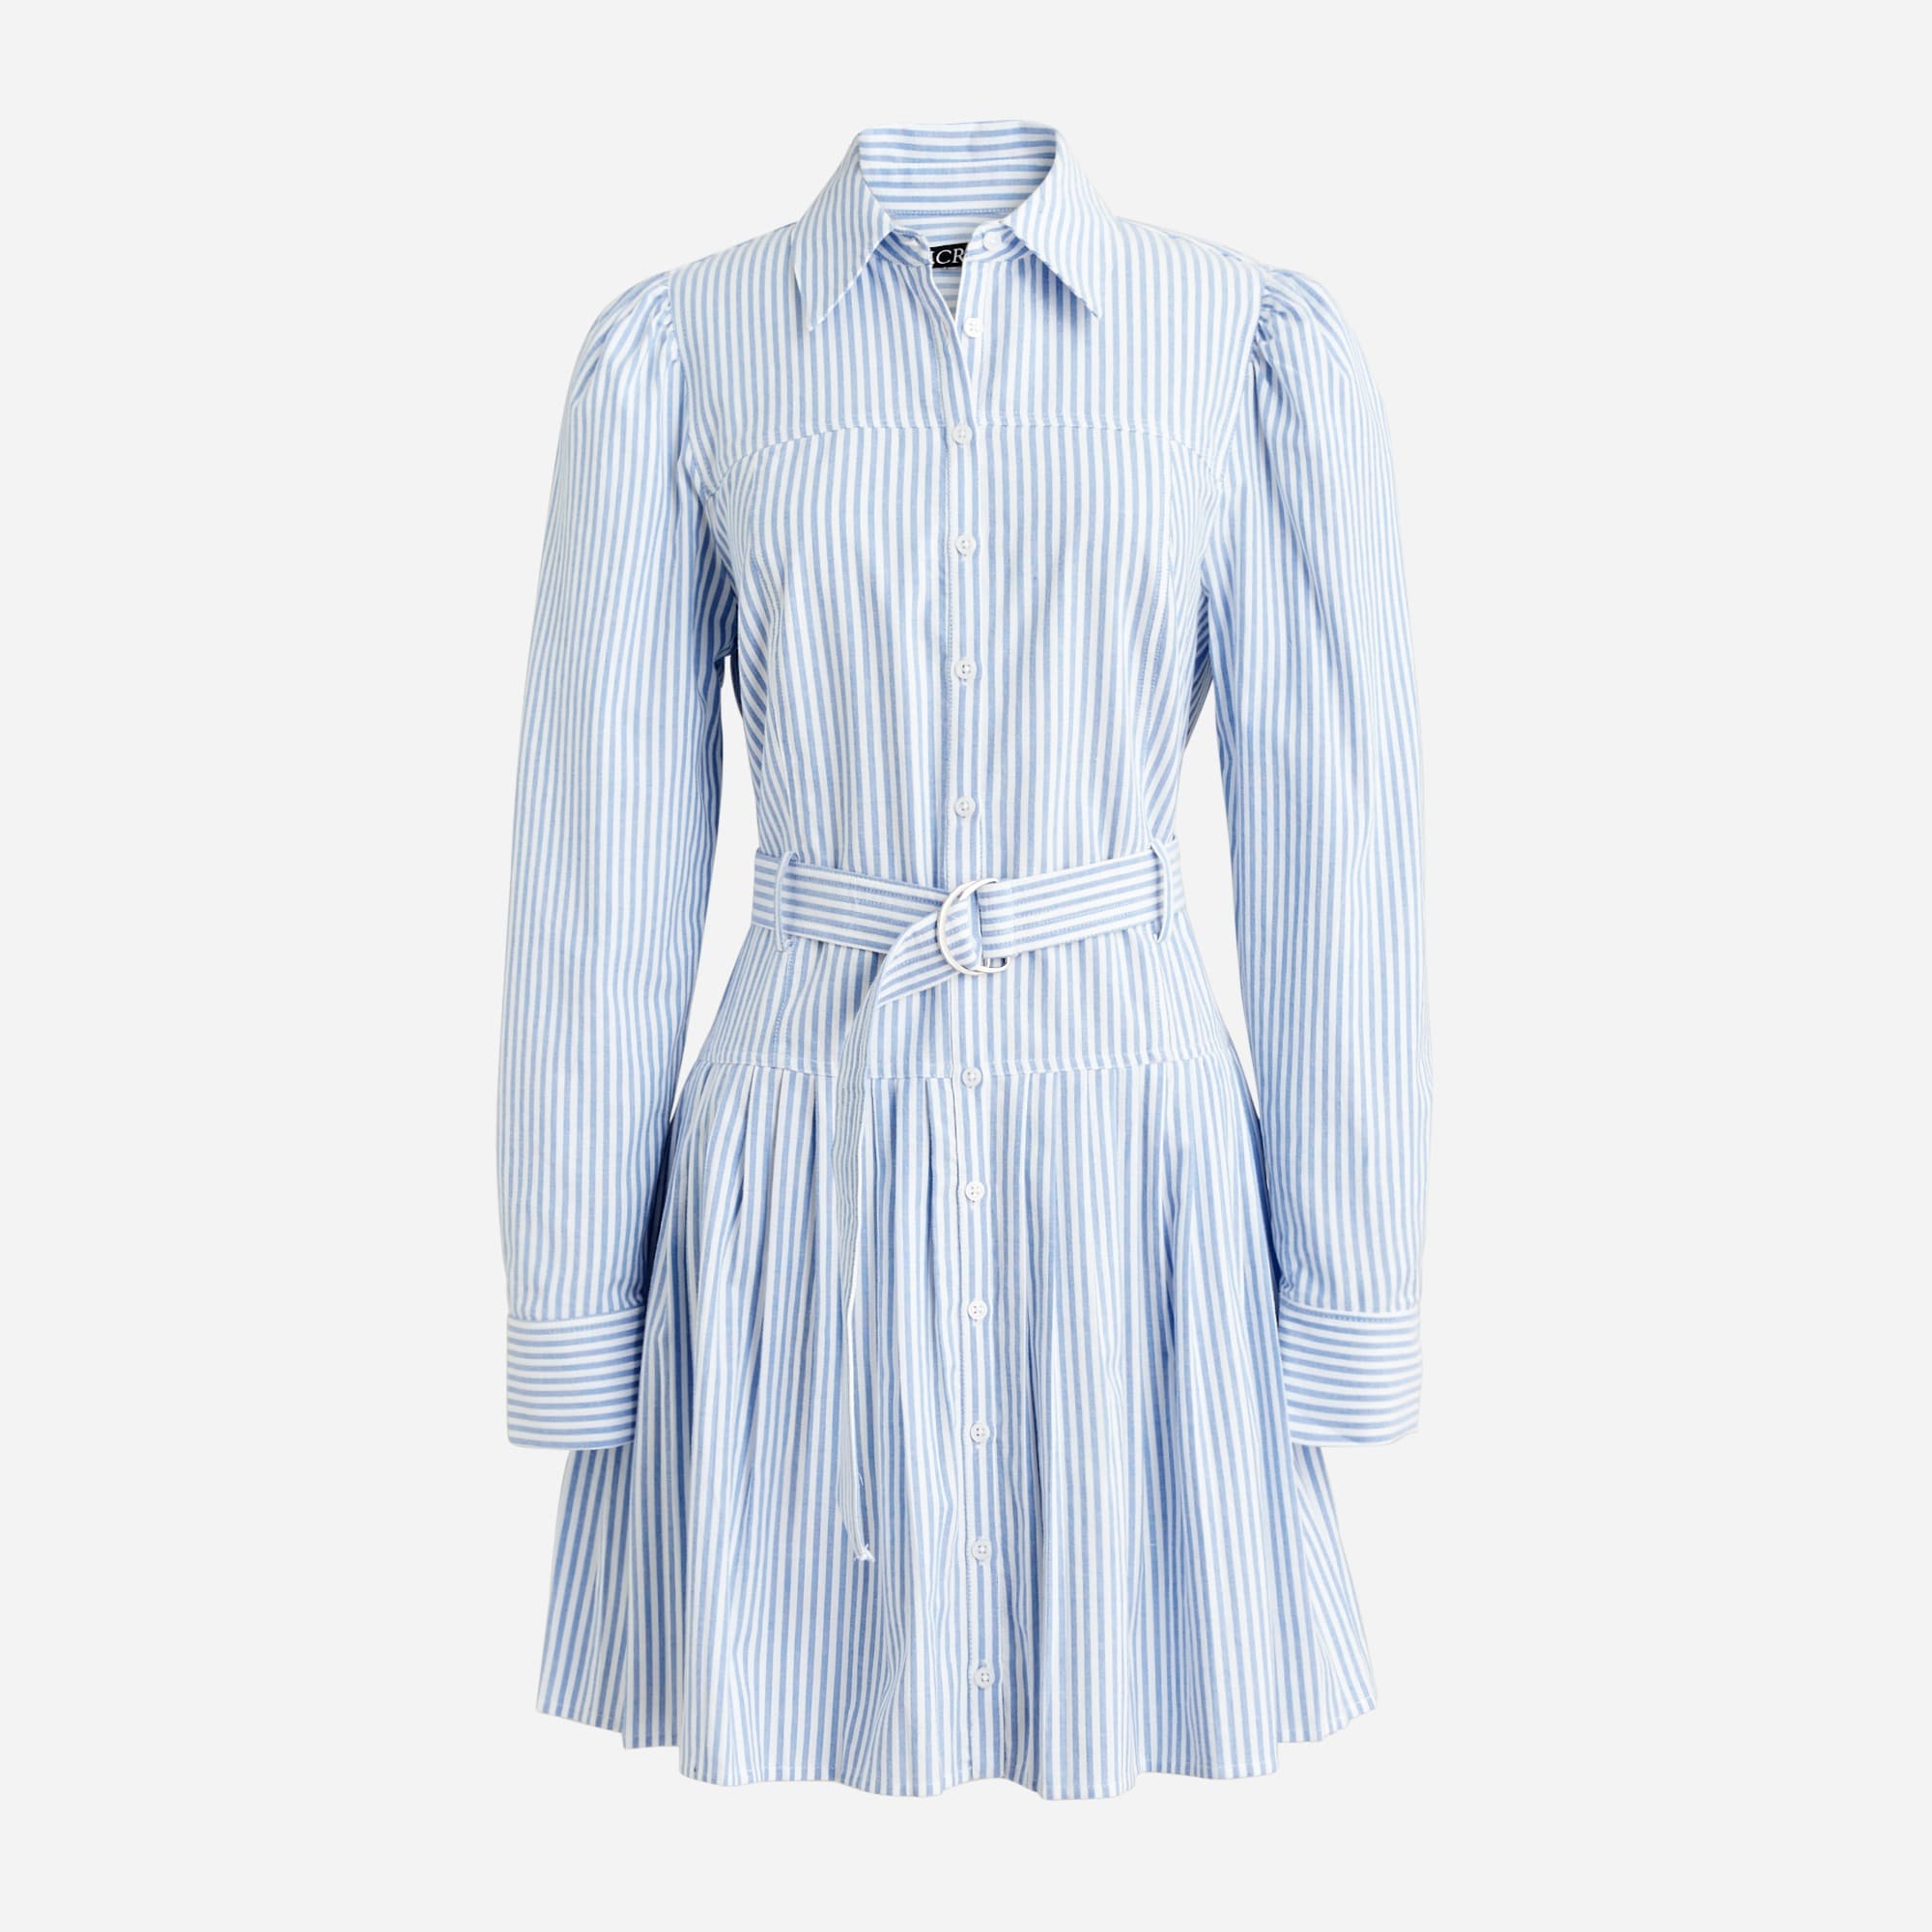  Fit-and-flare shirtdress in striped lightweight oxford